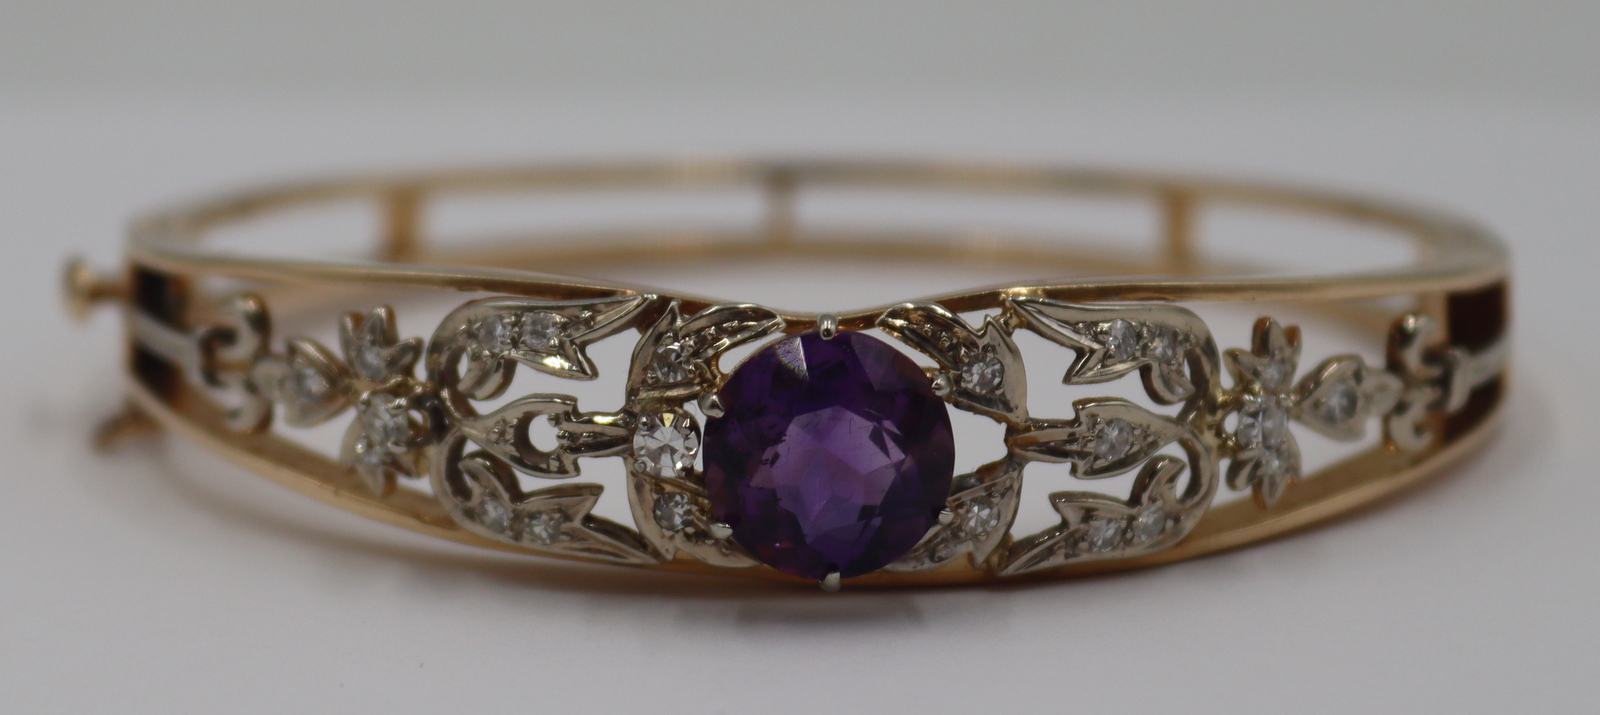 JEWELRY 14KT GOLD AMETHYST AND 3bc796